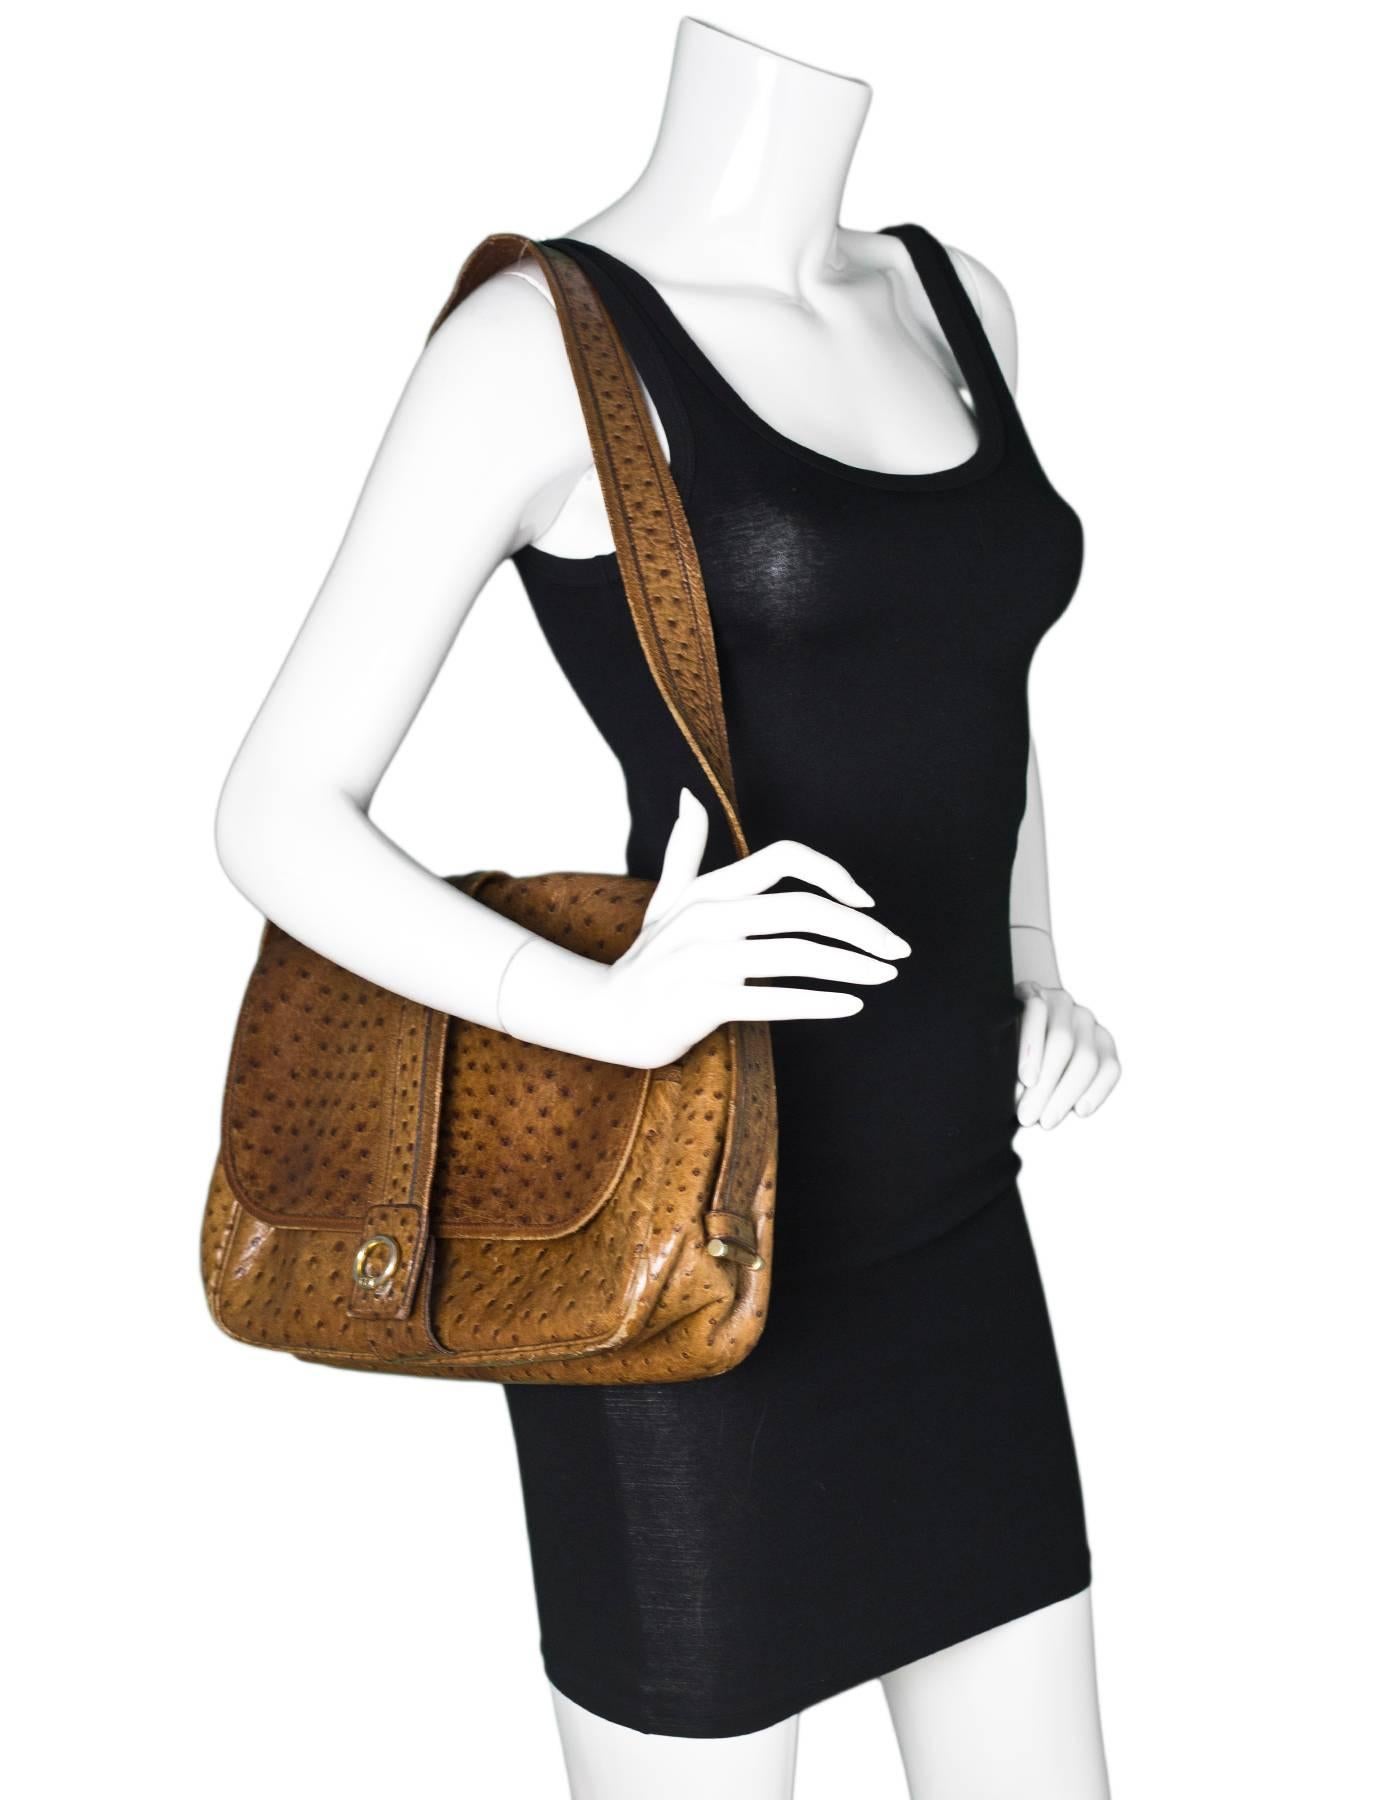 Hermes Vintage Brown Ostrich Shoulder Bag

Made In: France
Color: Brown
Hardware: Goldtone
Materials: Ostrich, metal
Lining: Brown leather
Closure/Opening: Flap top with snap
Exterior Pockets: Zip pocket at back
Interior Pockets: Three compartments,